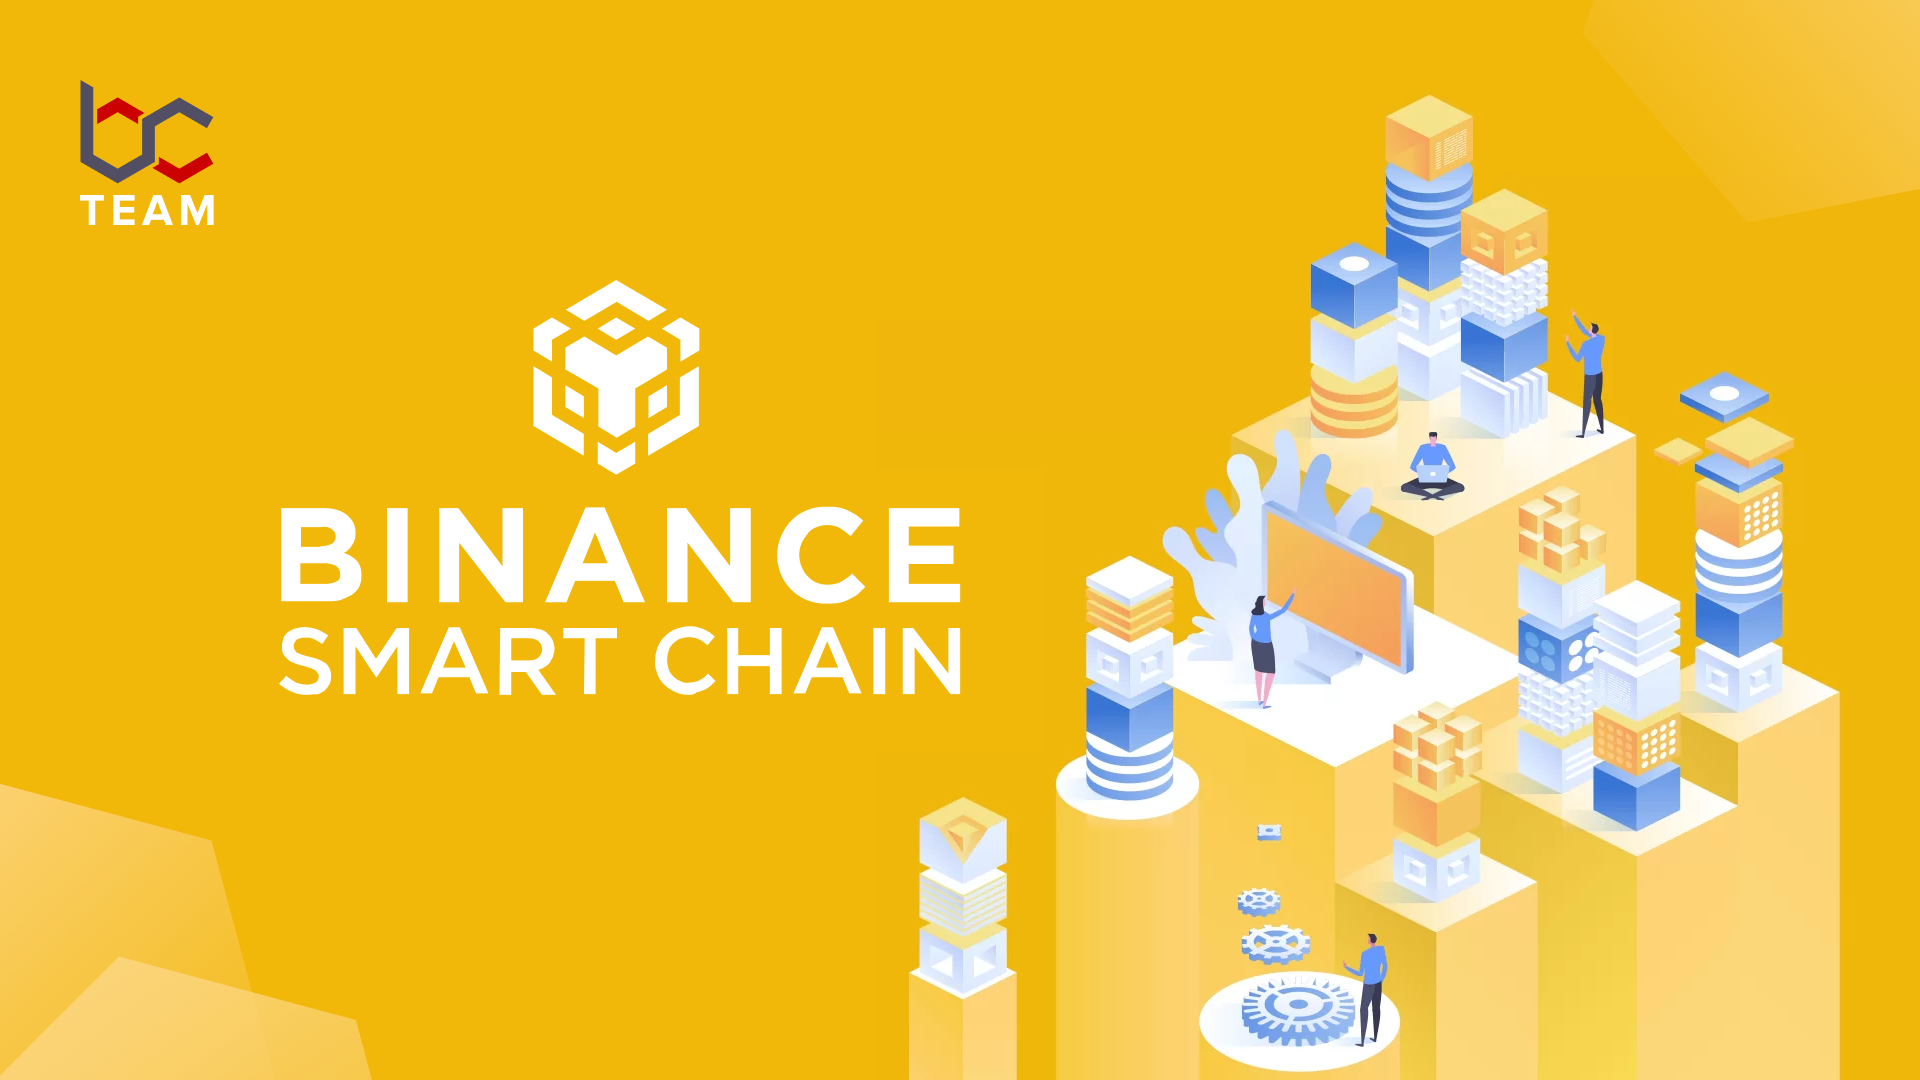 A guide to BNB Smart Chain: how it works, what it offers and how to use it to your advantage